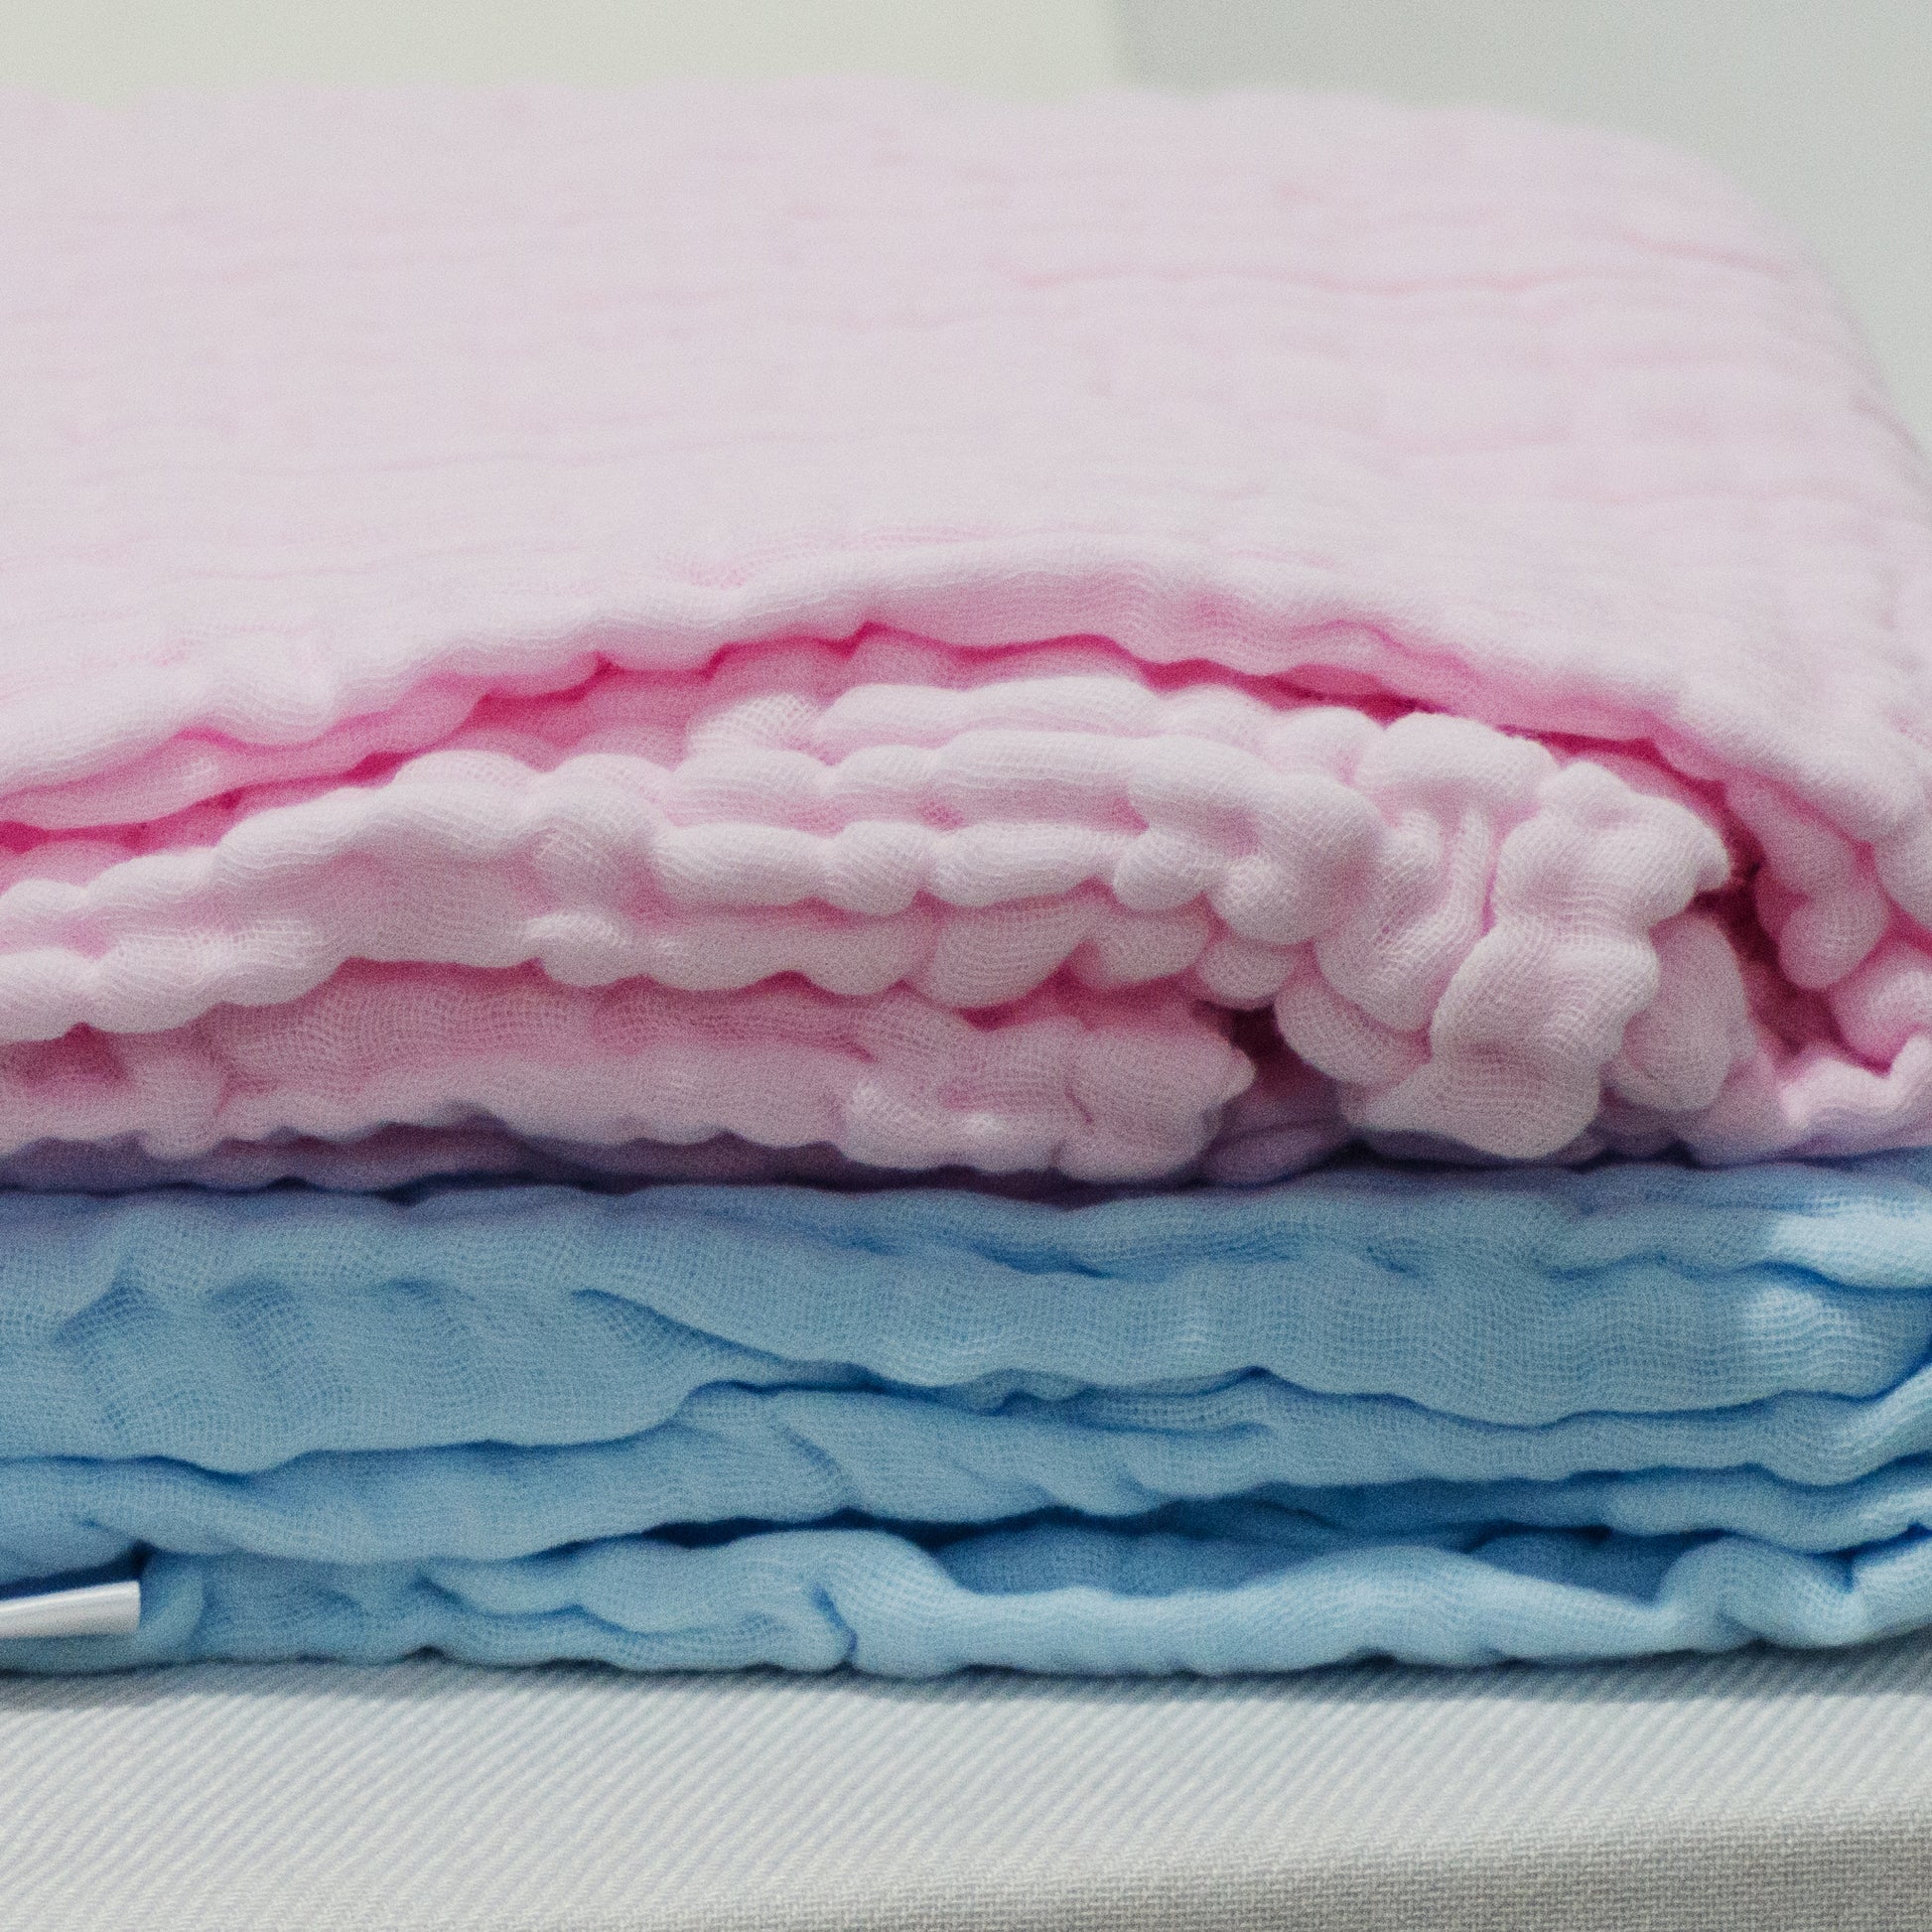 6-Layered Cotton Gauze Baby Towel/Blankets - Pink, Blue New - BabySpace Shop